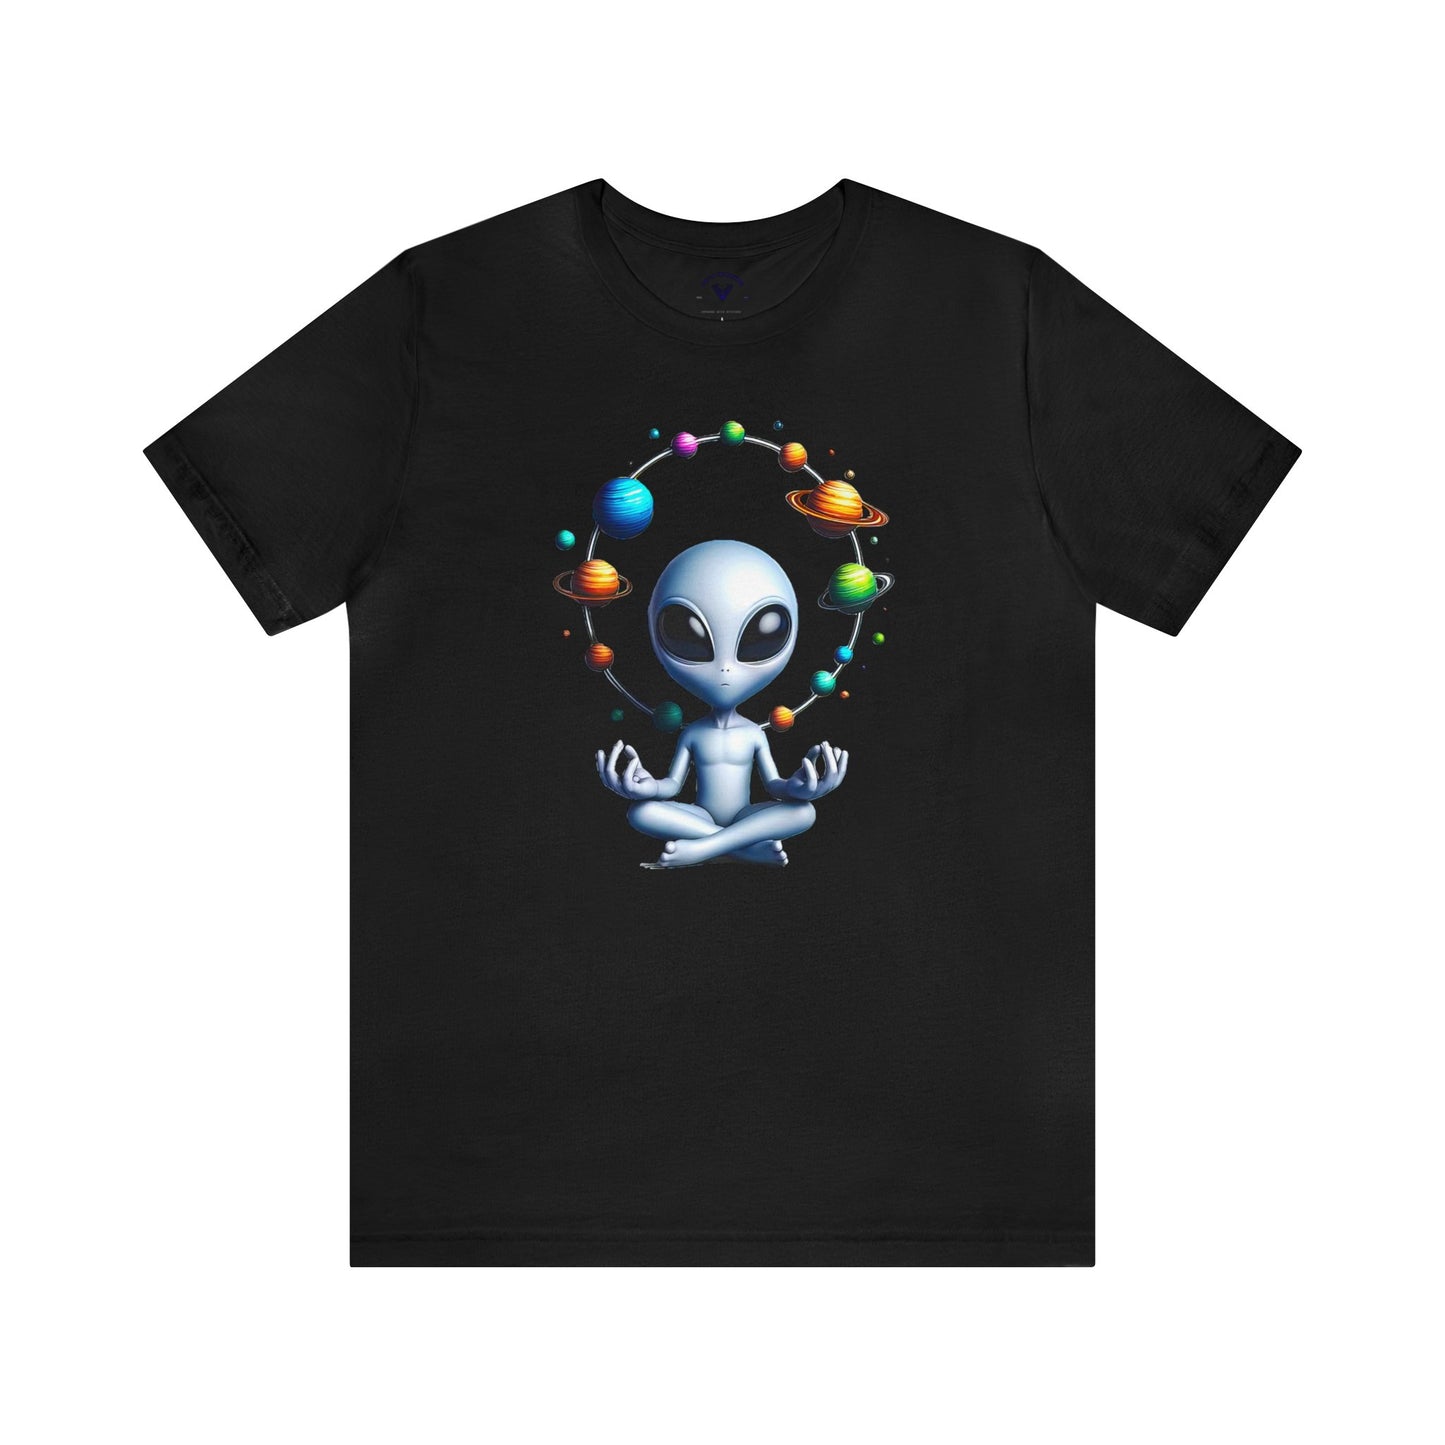 Generation Mood's Meditation in the Cosmos: Alien Sweatshirt , Find Your Zen Among the Planets tee in black.